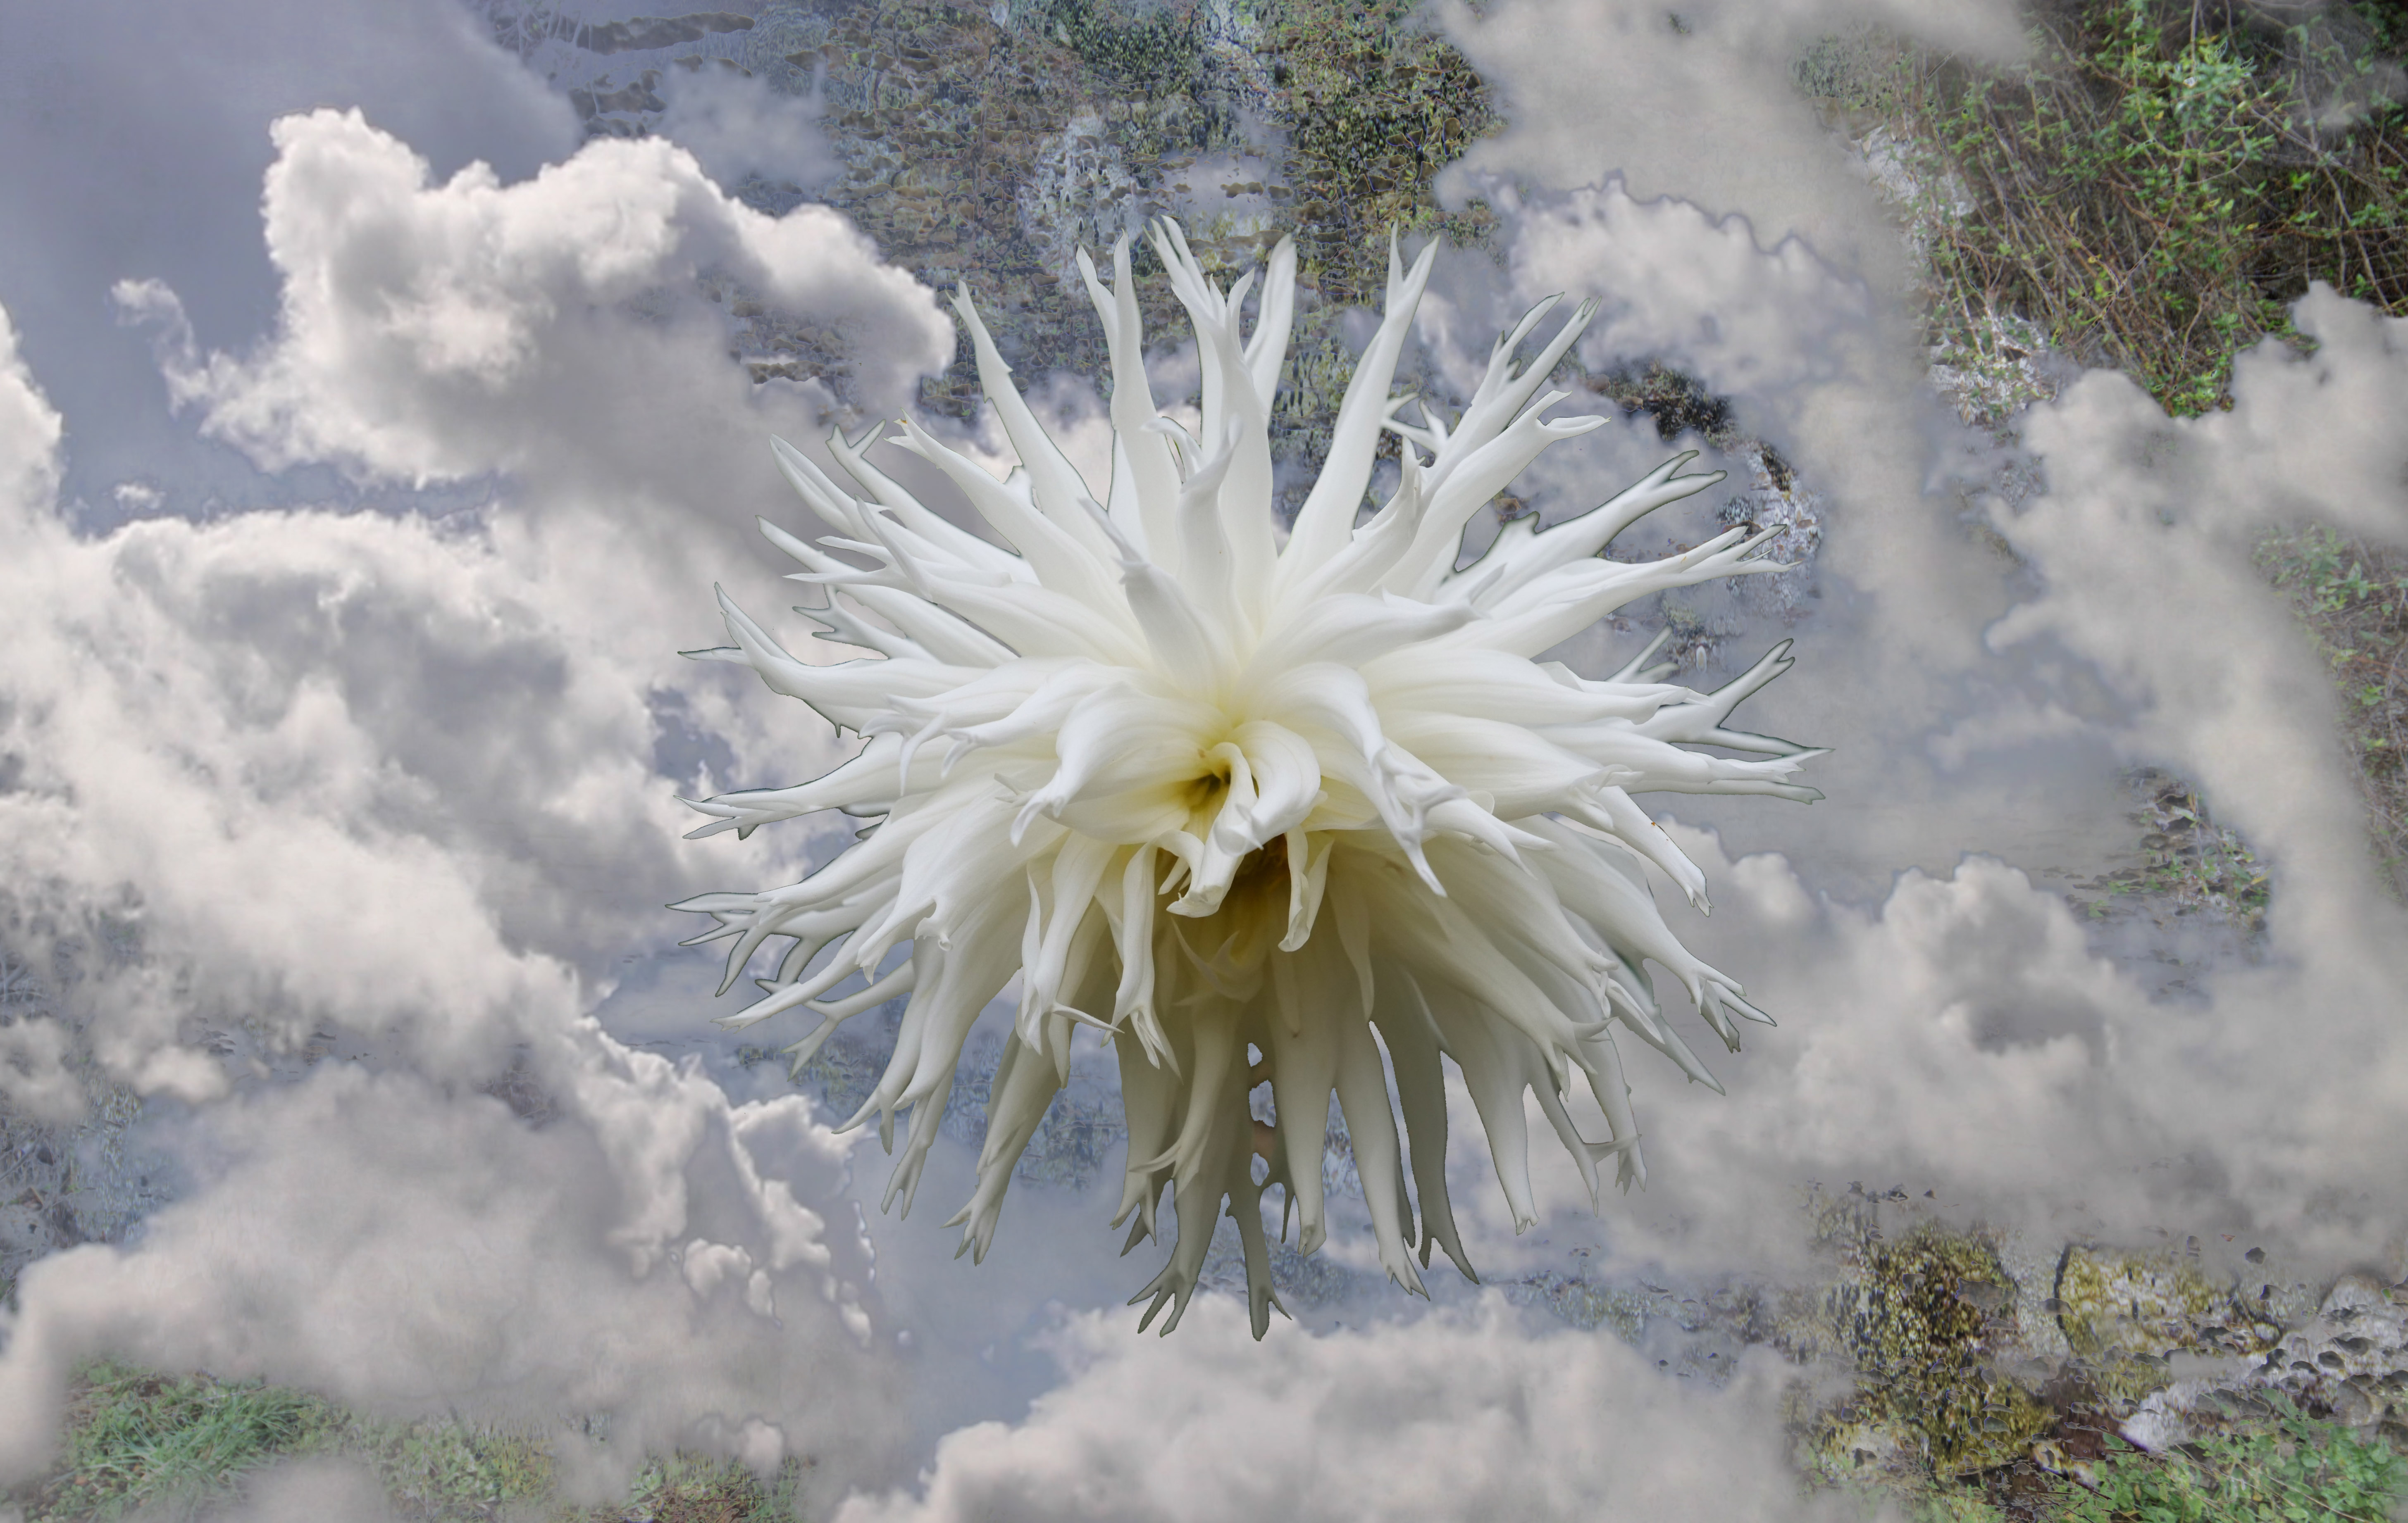 A white flower centered and floating in a cloudy sky with patches of foliage